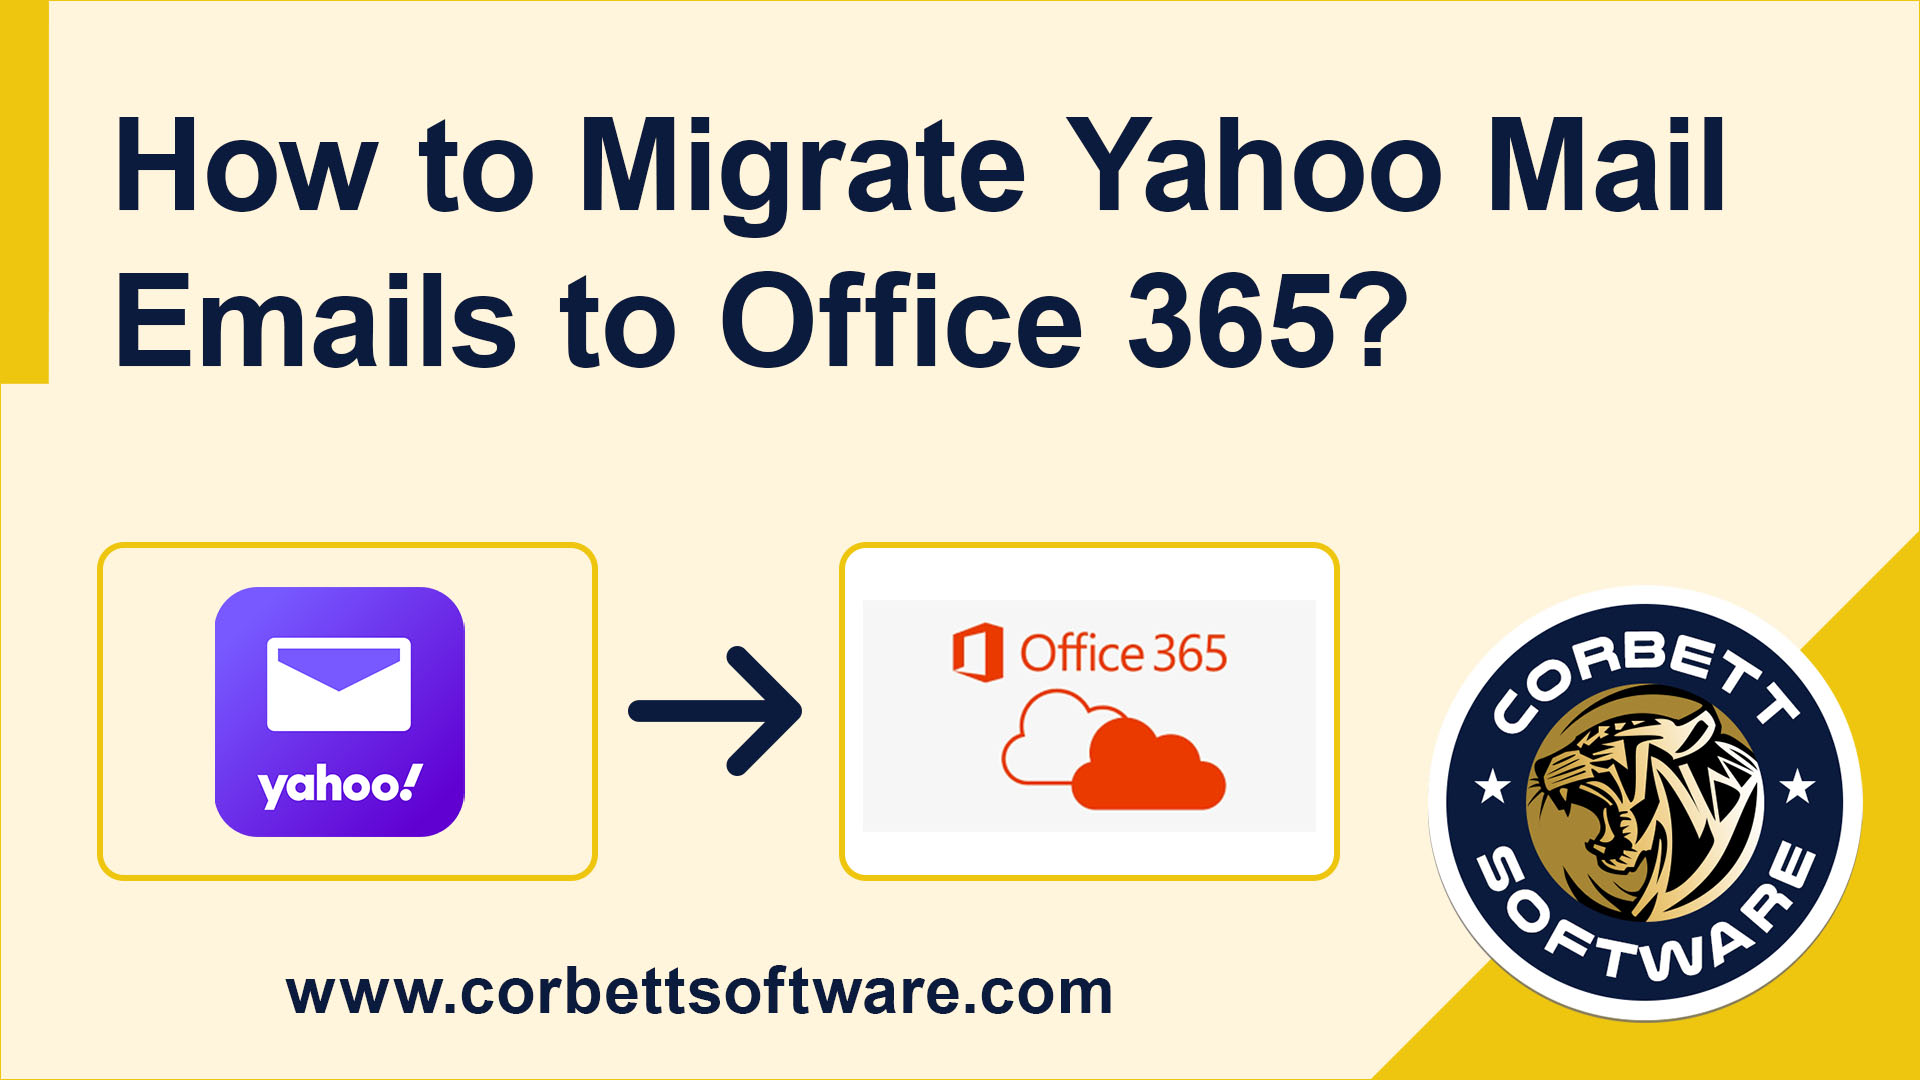 Migrate Yahoo Mail to Office 365